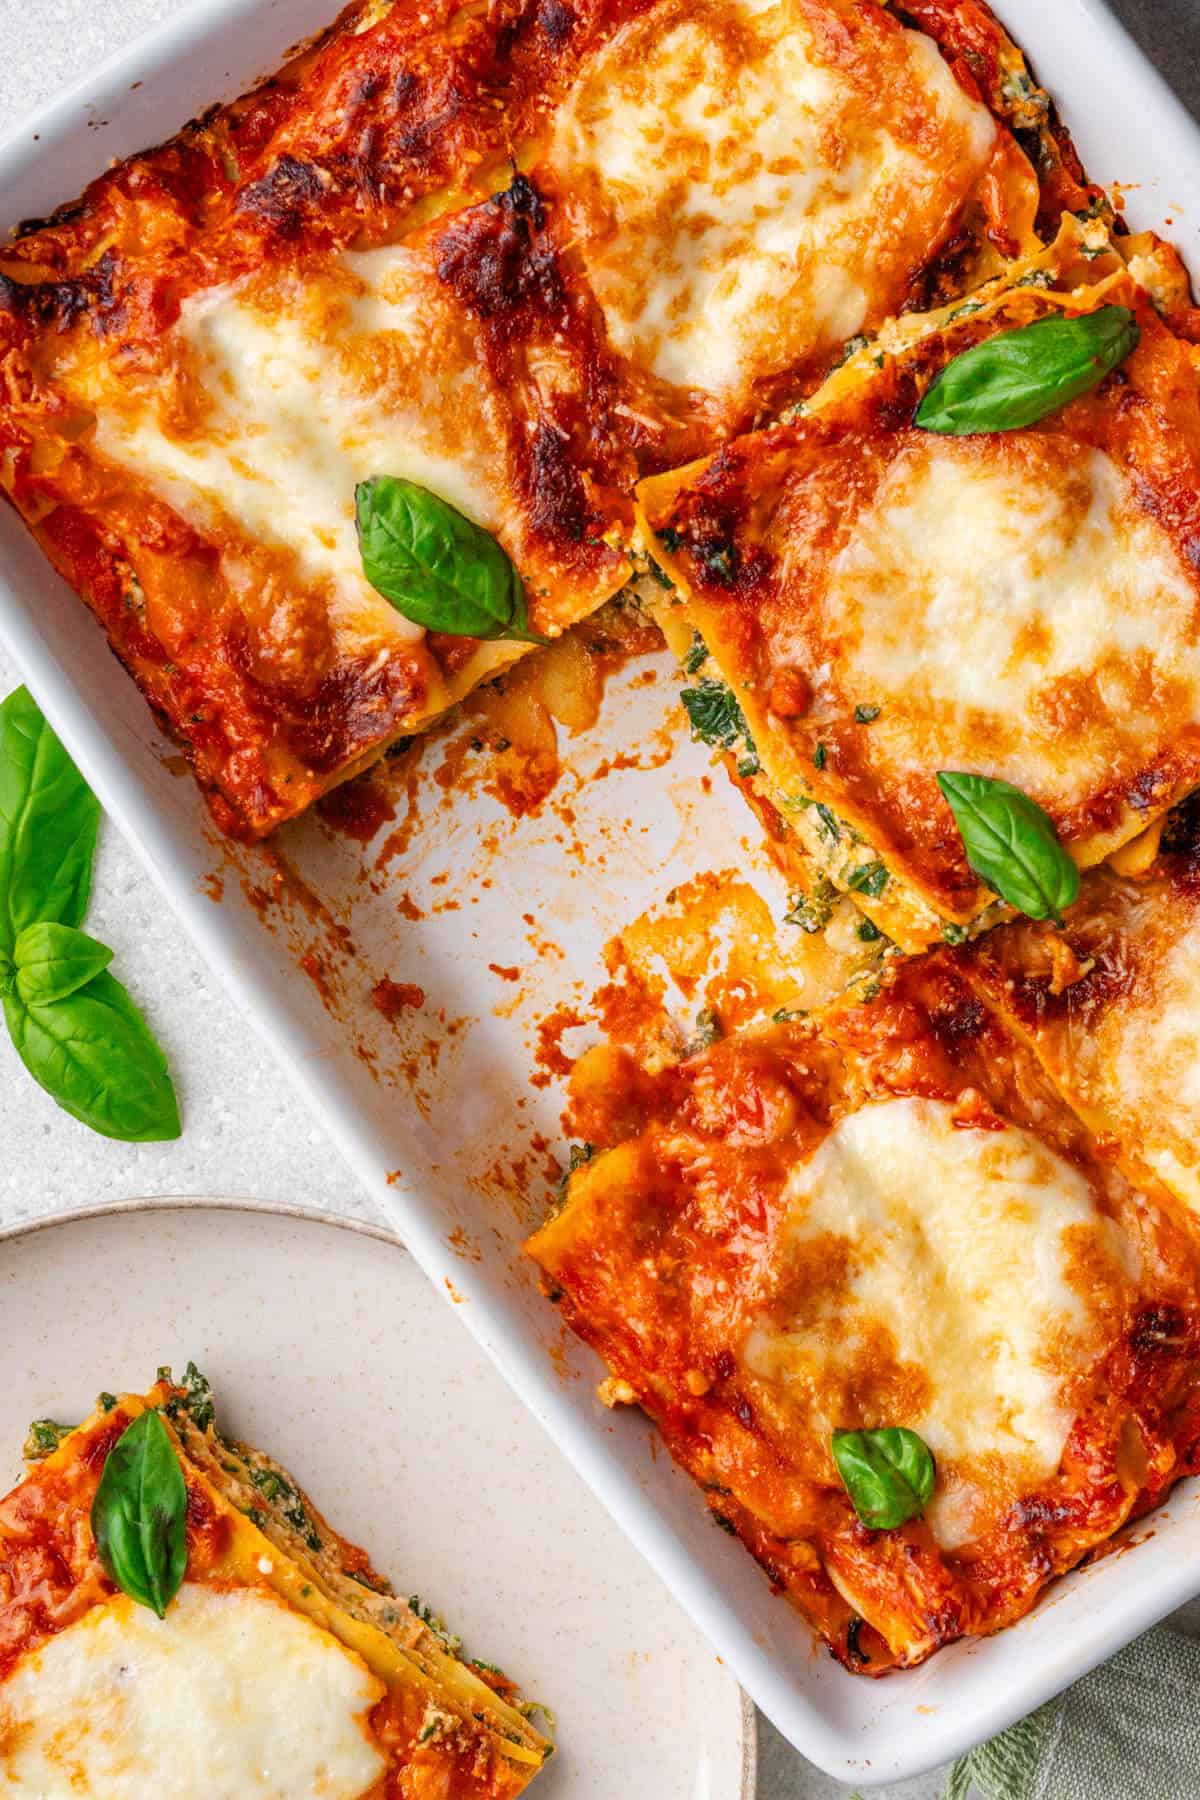 Spinach lasagna recipe in dish with a piece missing